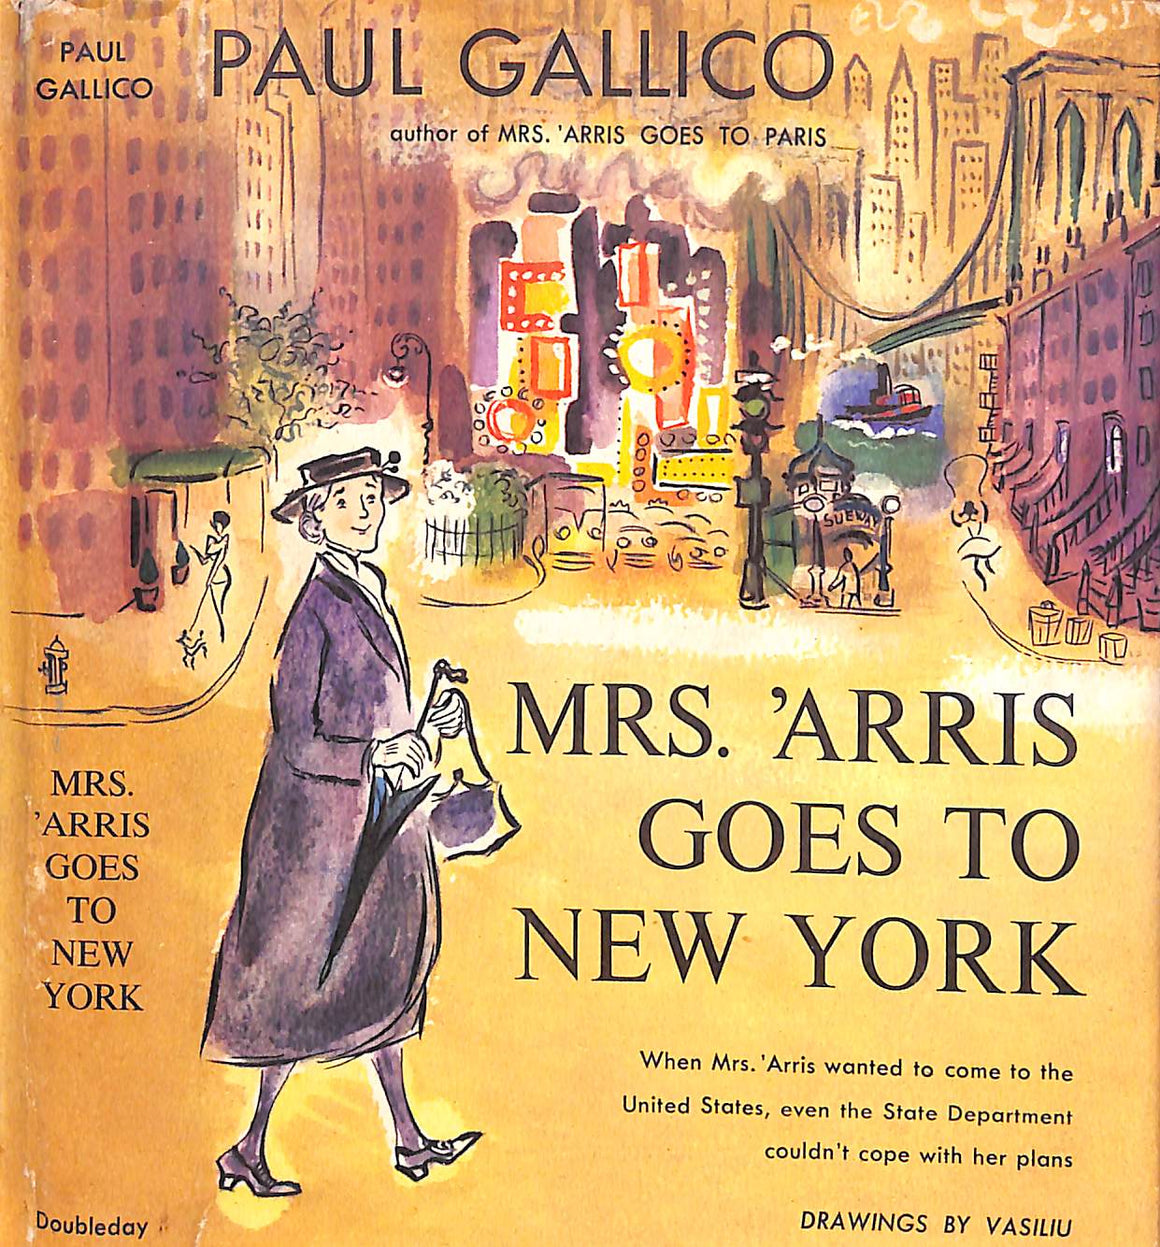 "Mrs. 'Arris Goes To New York" 1960 GALLICO, Paul